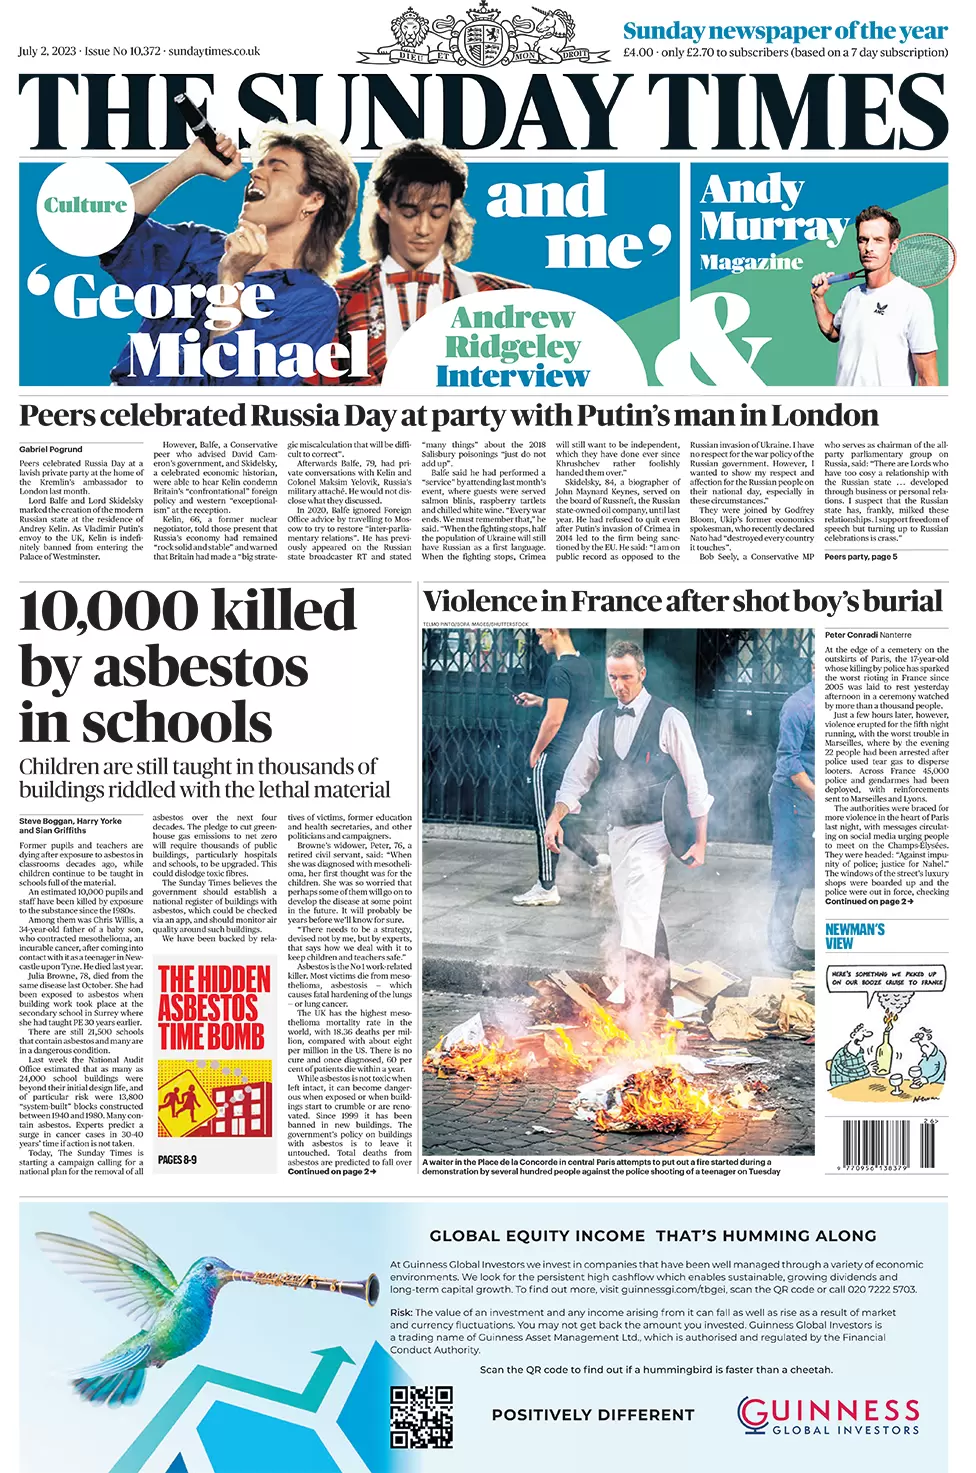 The Sunday Times - 10,000 killed by asbestos in schools